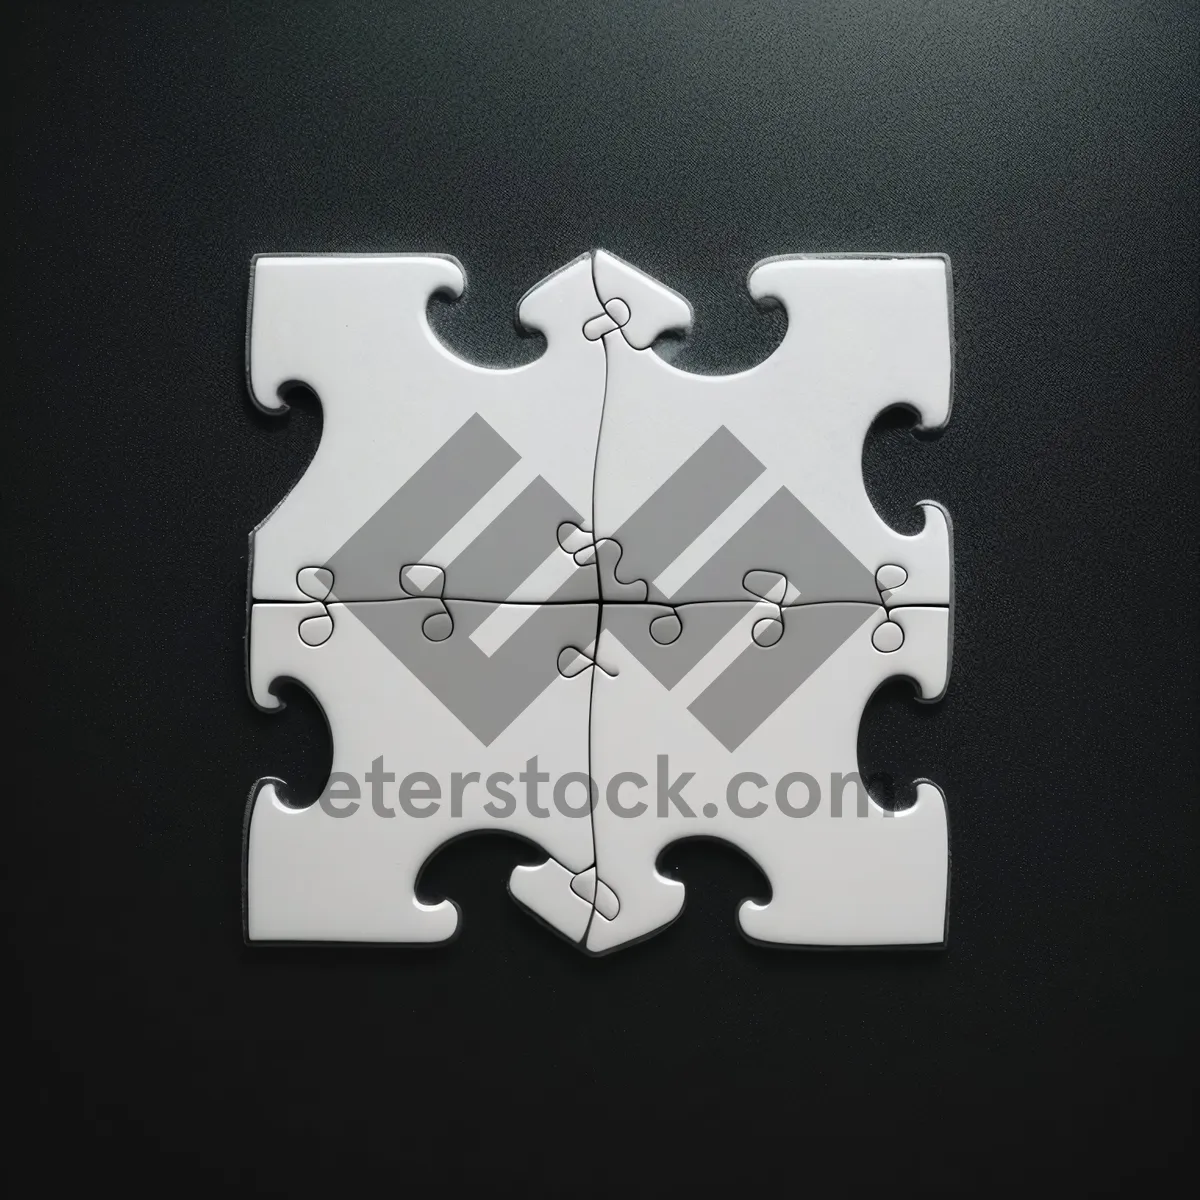 Picture of Connect the Pieces: Business Puzzle Solution